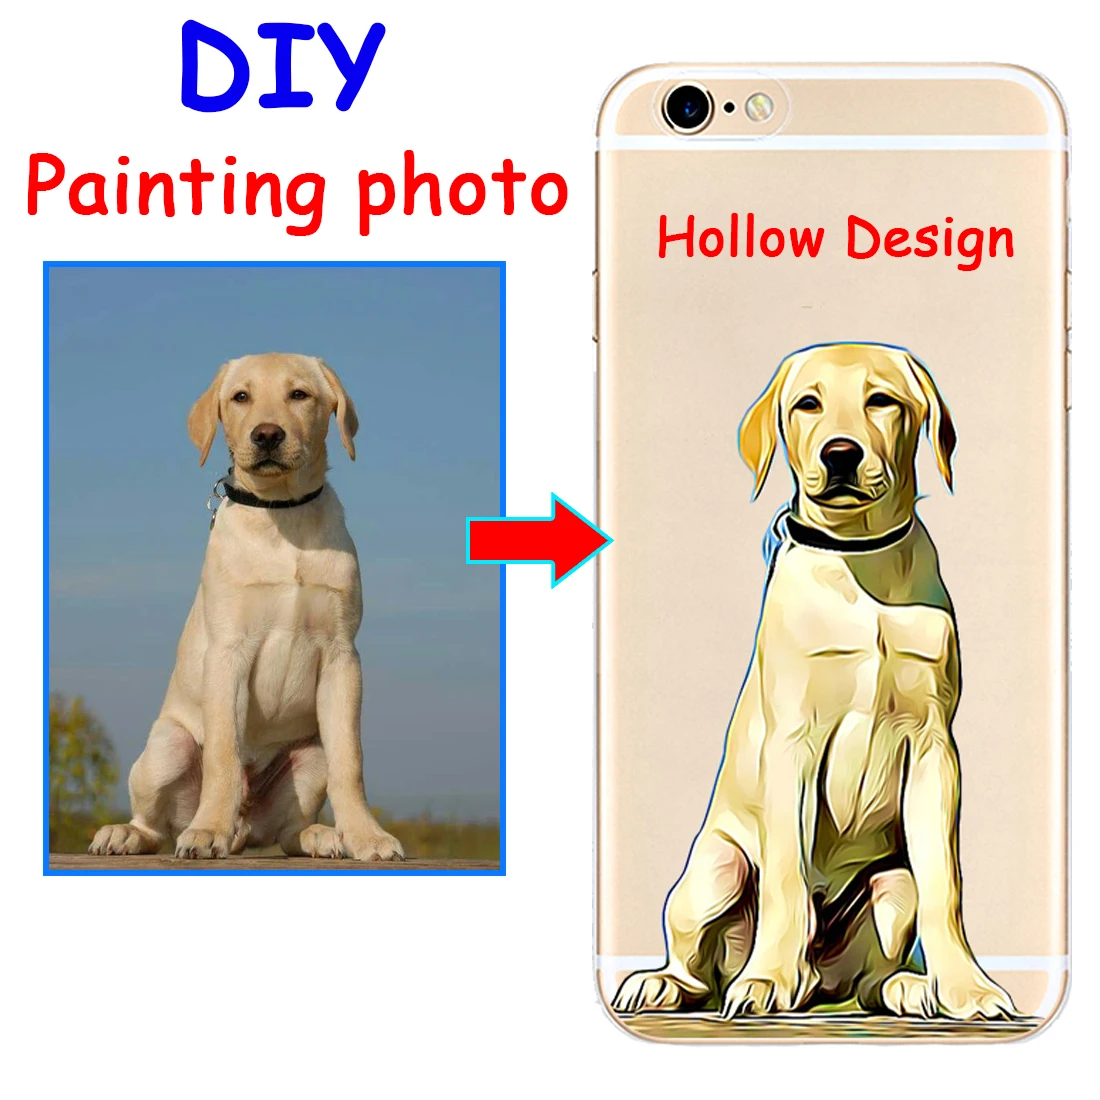 

Custom DIY image Hand Drawn Dog Hollow hard phone case cover for Samsung s8 s9plus S7e S6 for iPhone 7 6s 8plus 5s X XS XR XSMAX